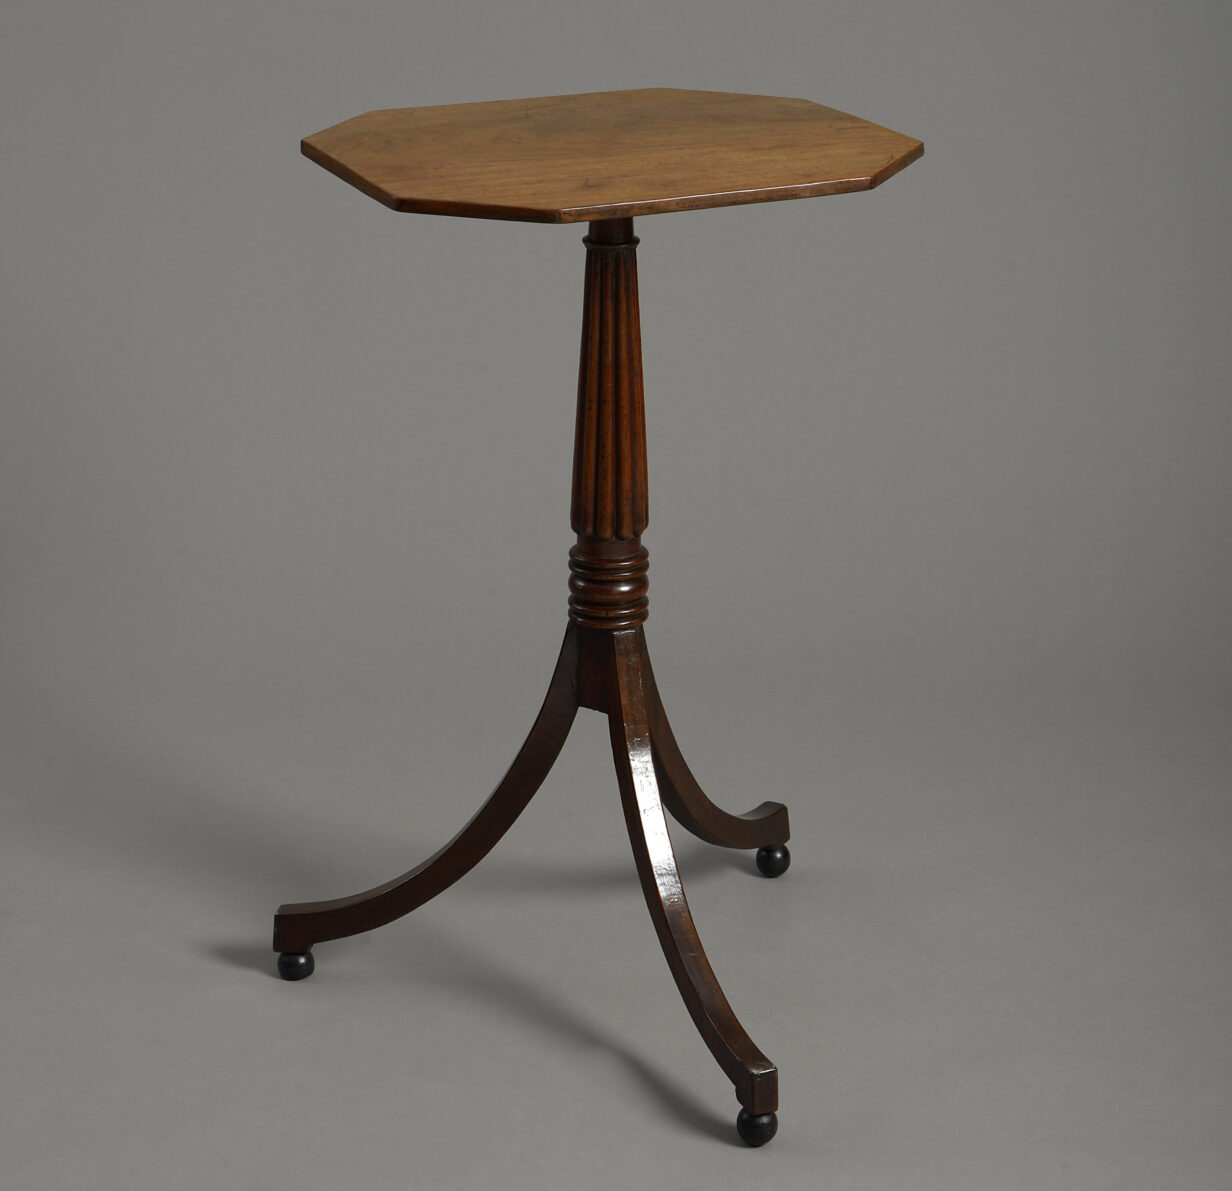 Pair of late 19th century octagonal mahogany end tables